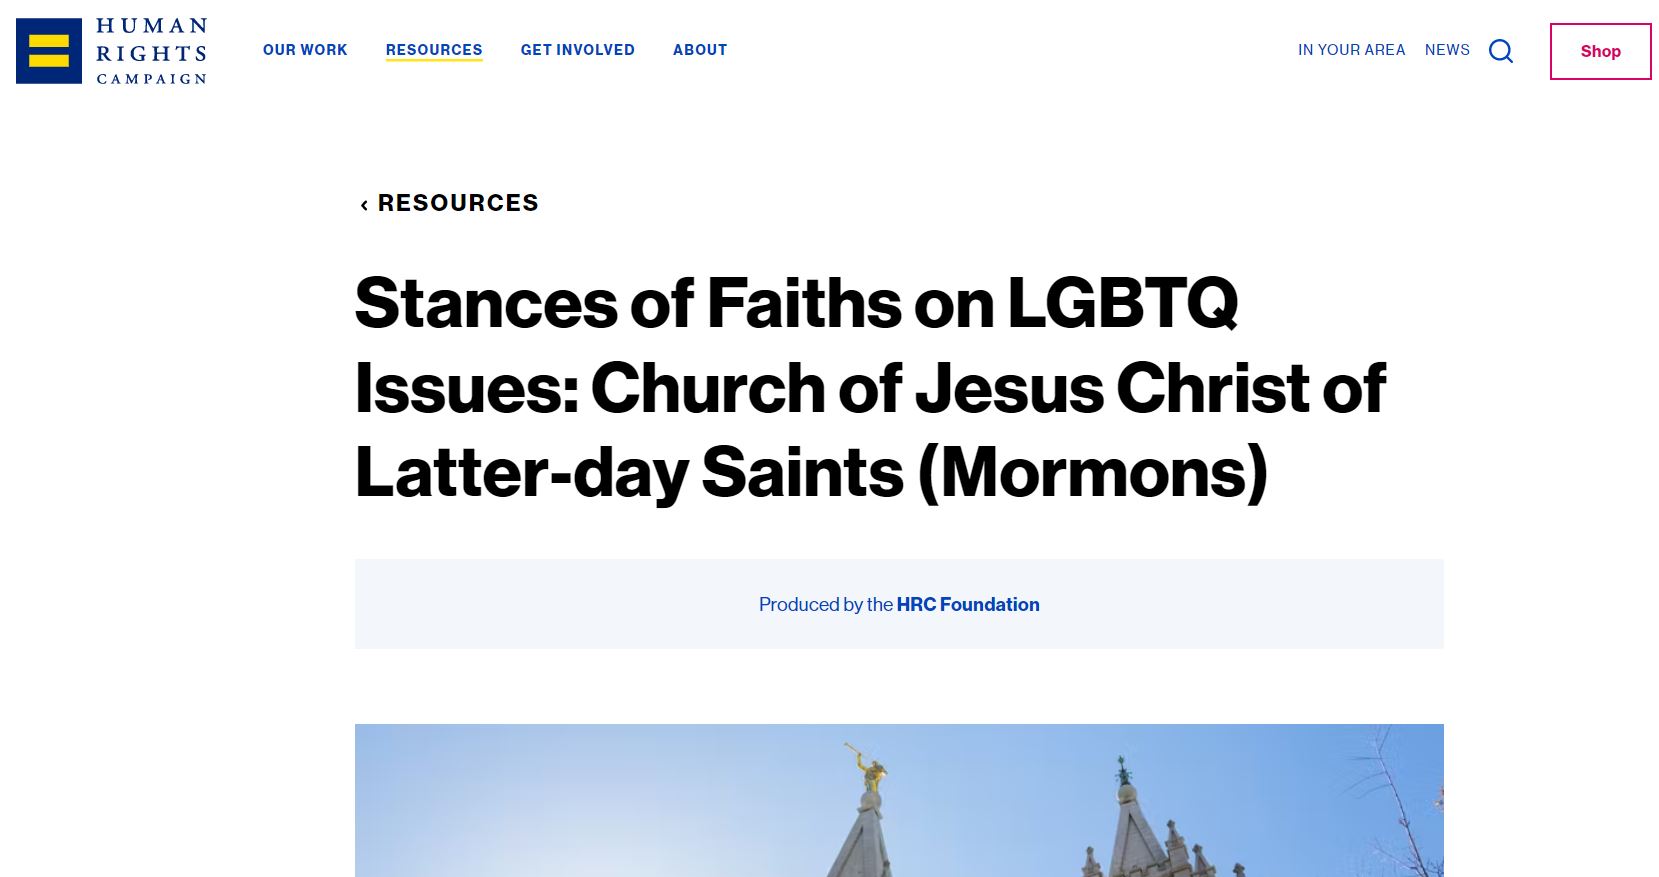 Human Rights Campaign Resources for the Mormon Church